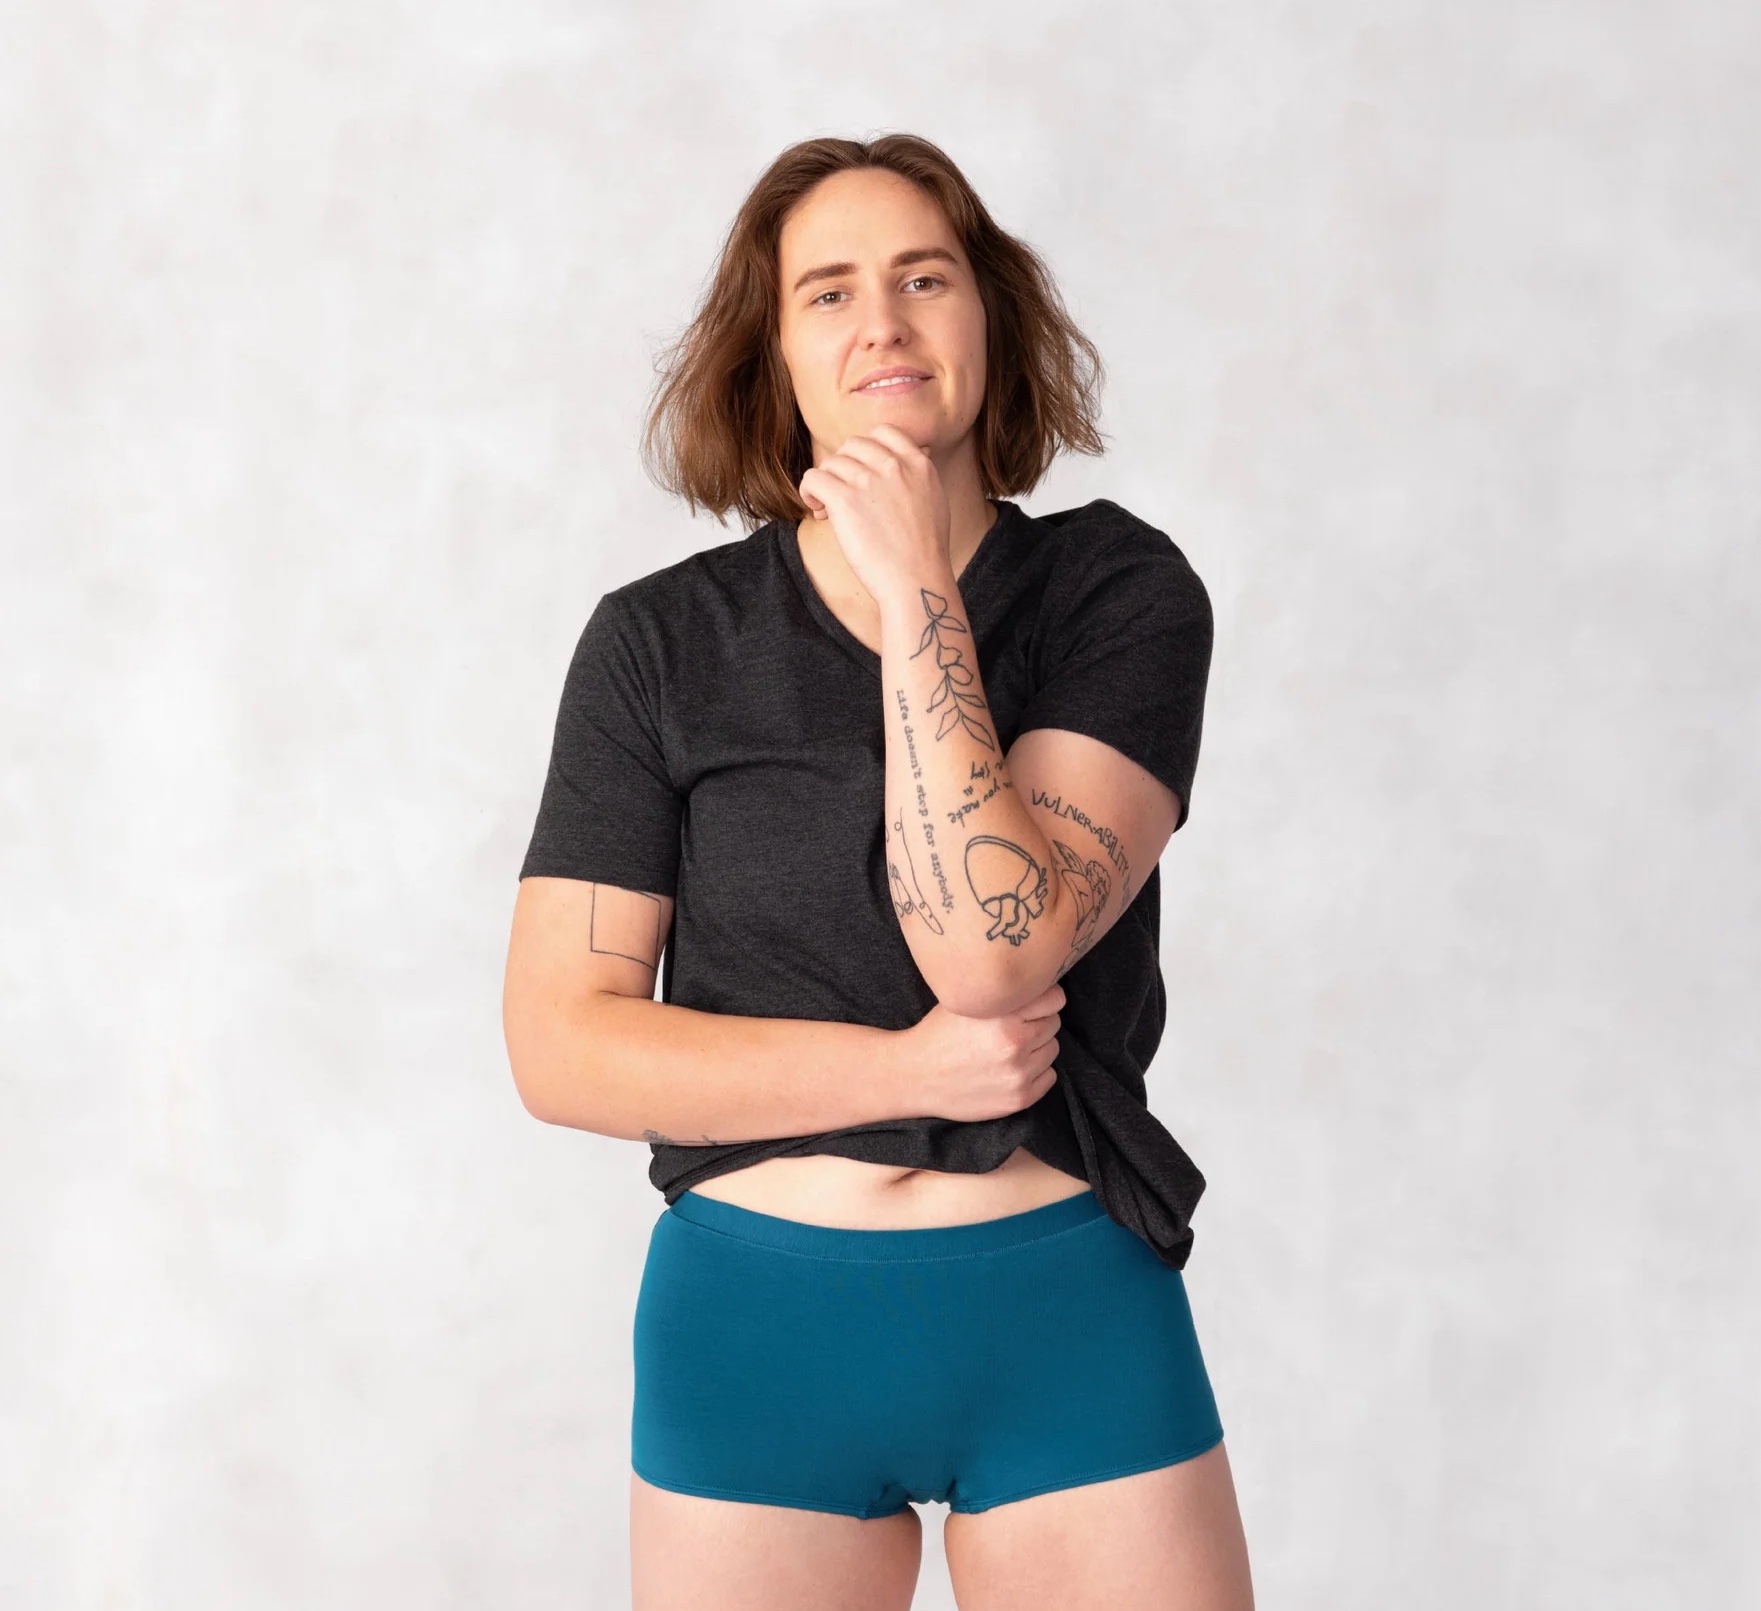 Period underwear brand Pantys launches gorgeous, inclusive line of boxer  shorts